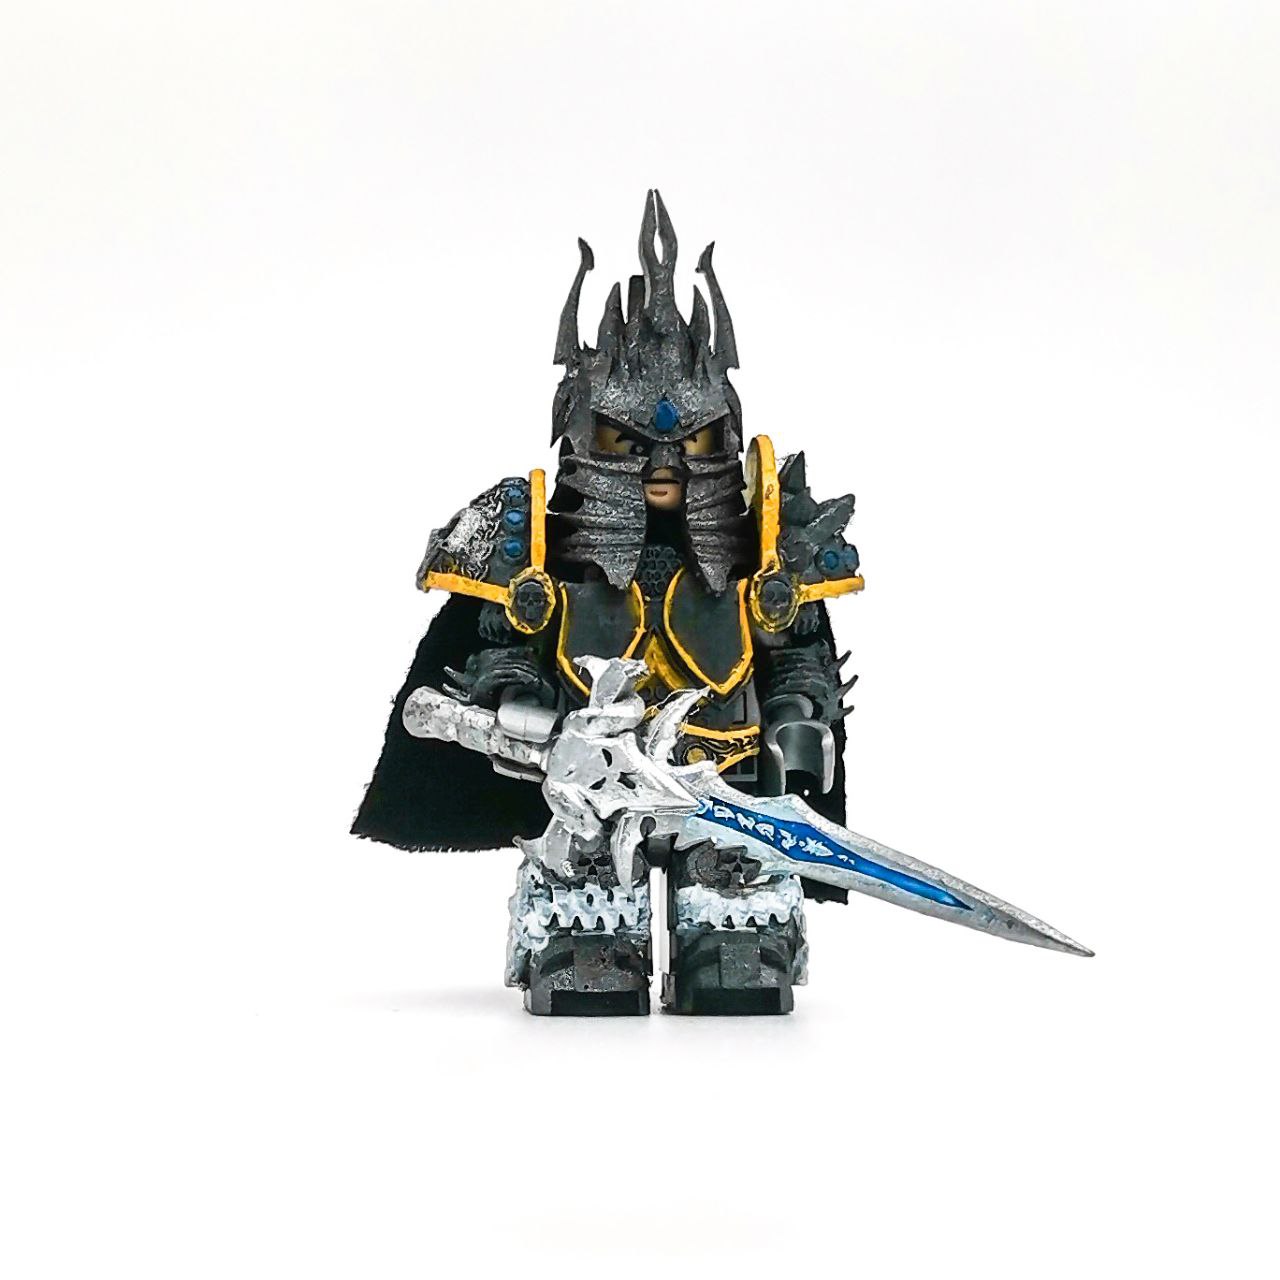 Reaven blocks custom 3D printed and painted wow winter king painted!